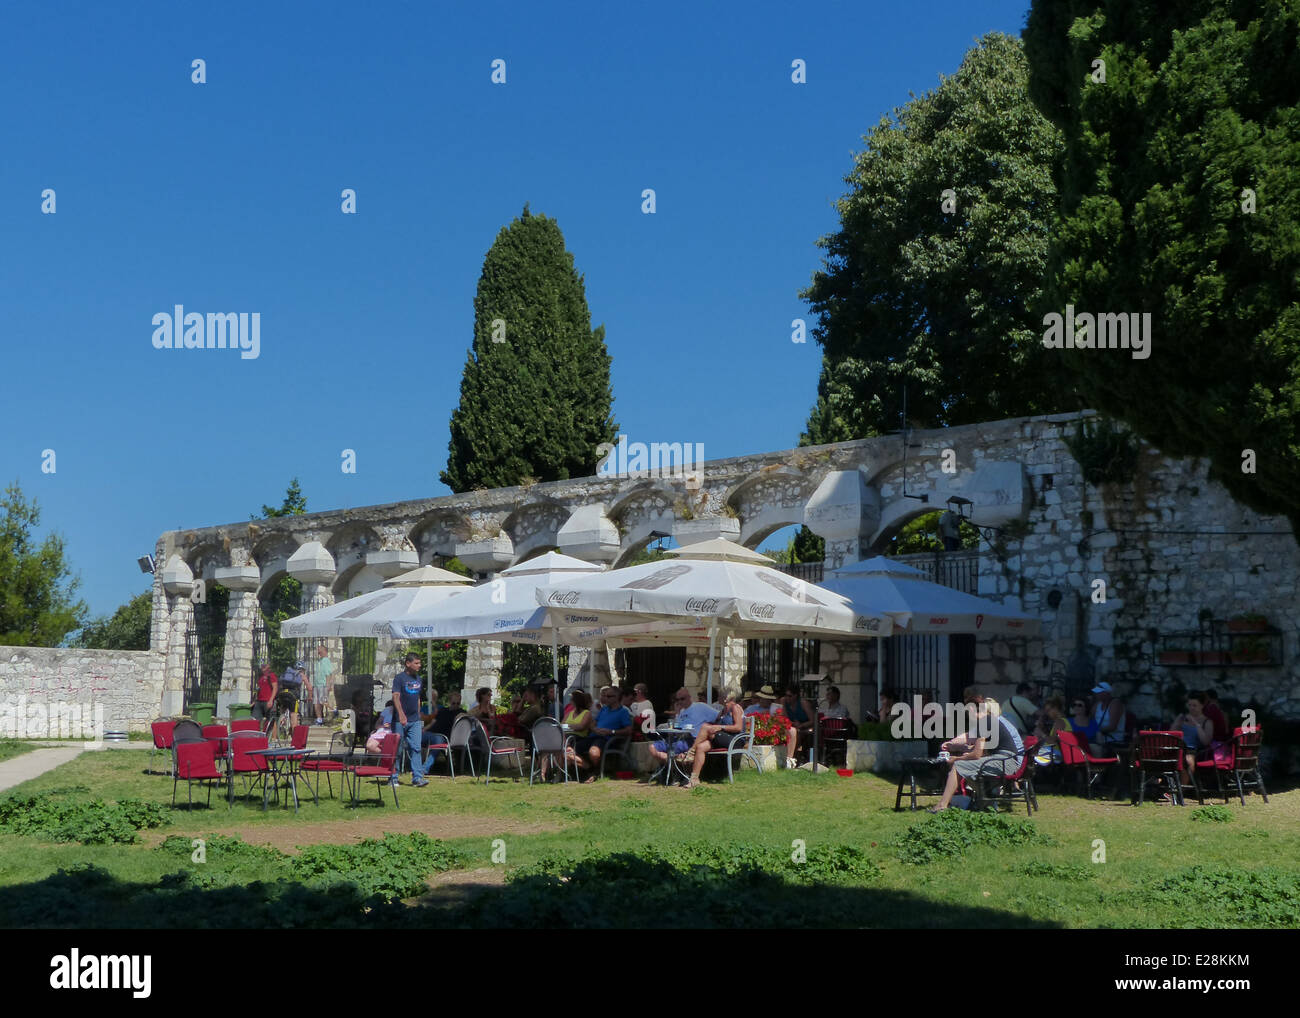 People sitting in an outdoor cafe on a hot sunny day under sunshades in Rovinj, Croatia Stock Photo